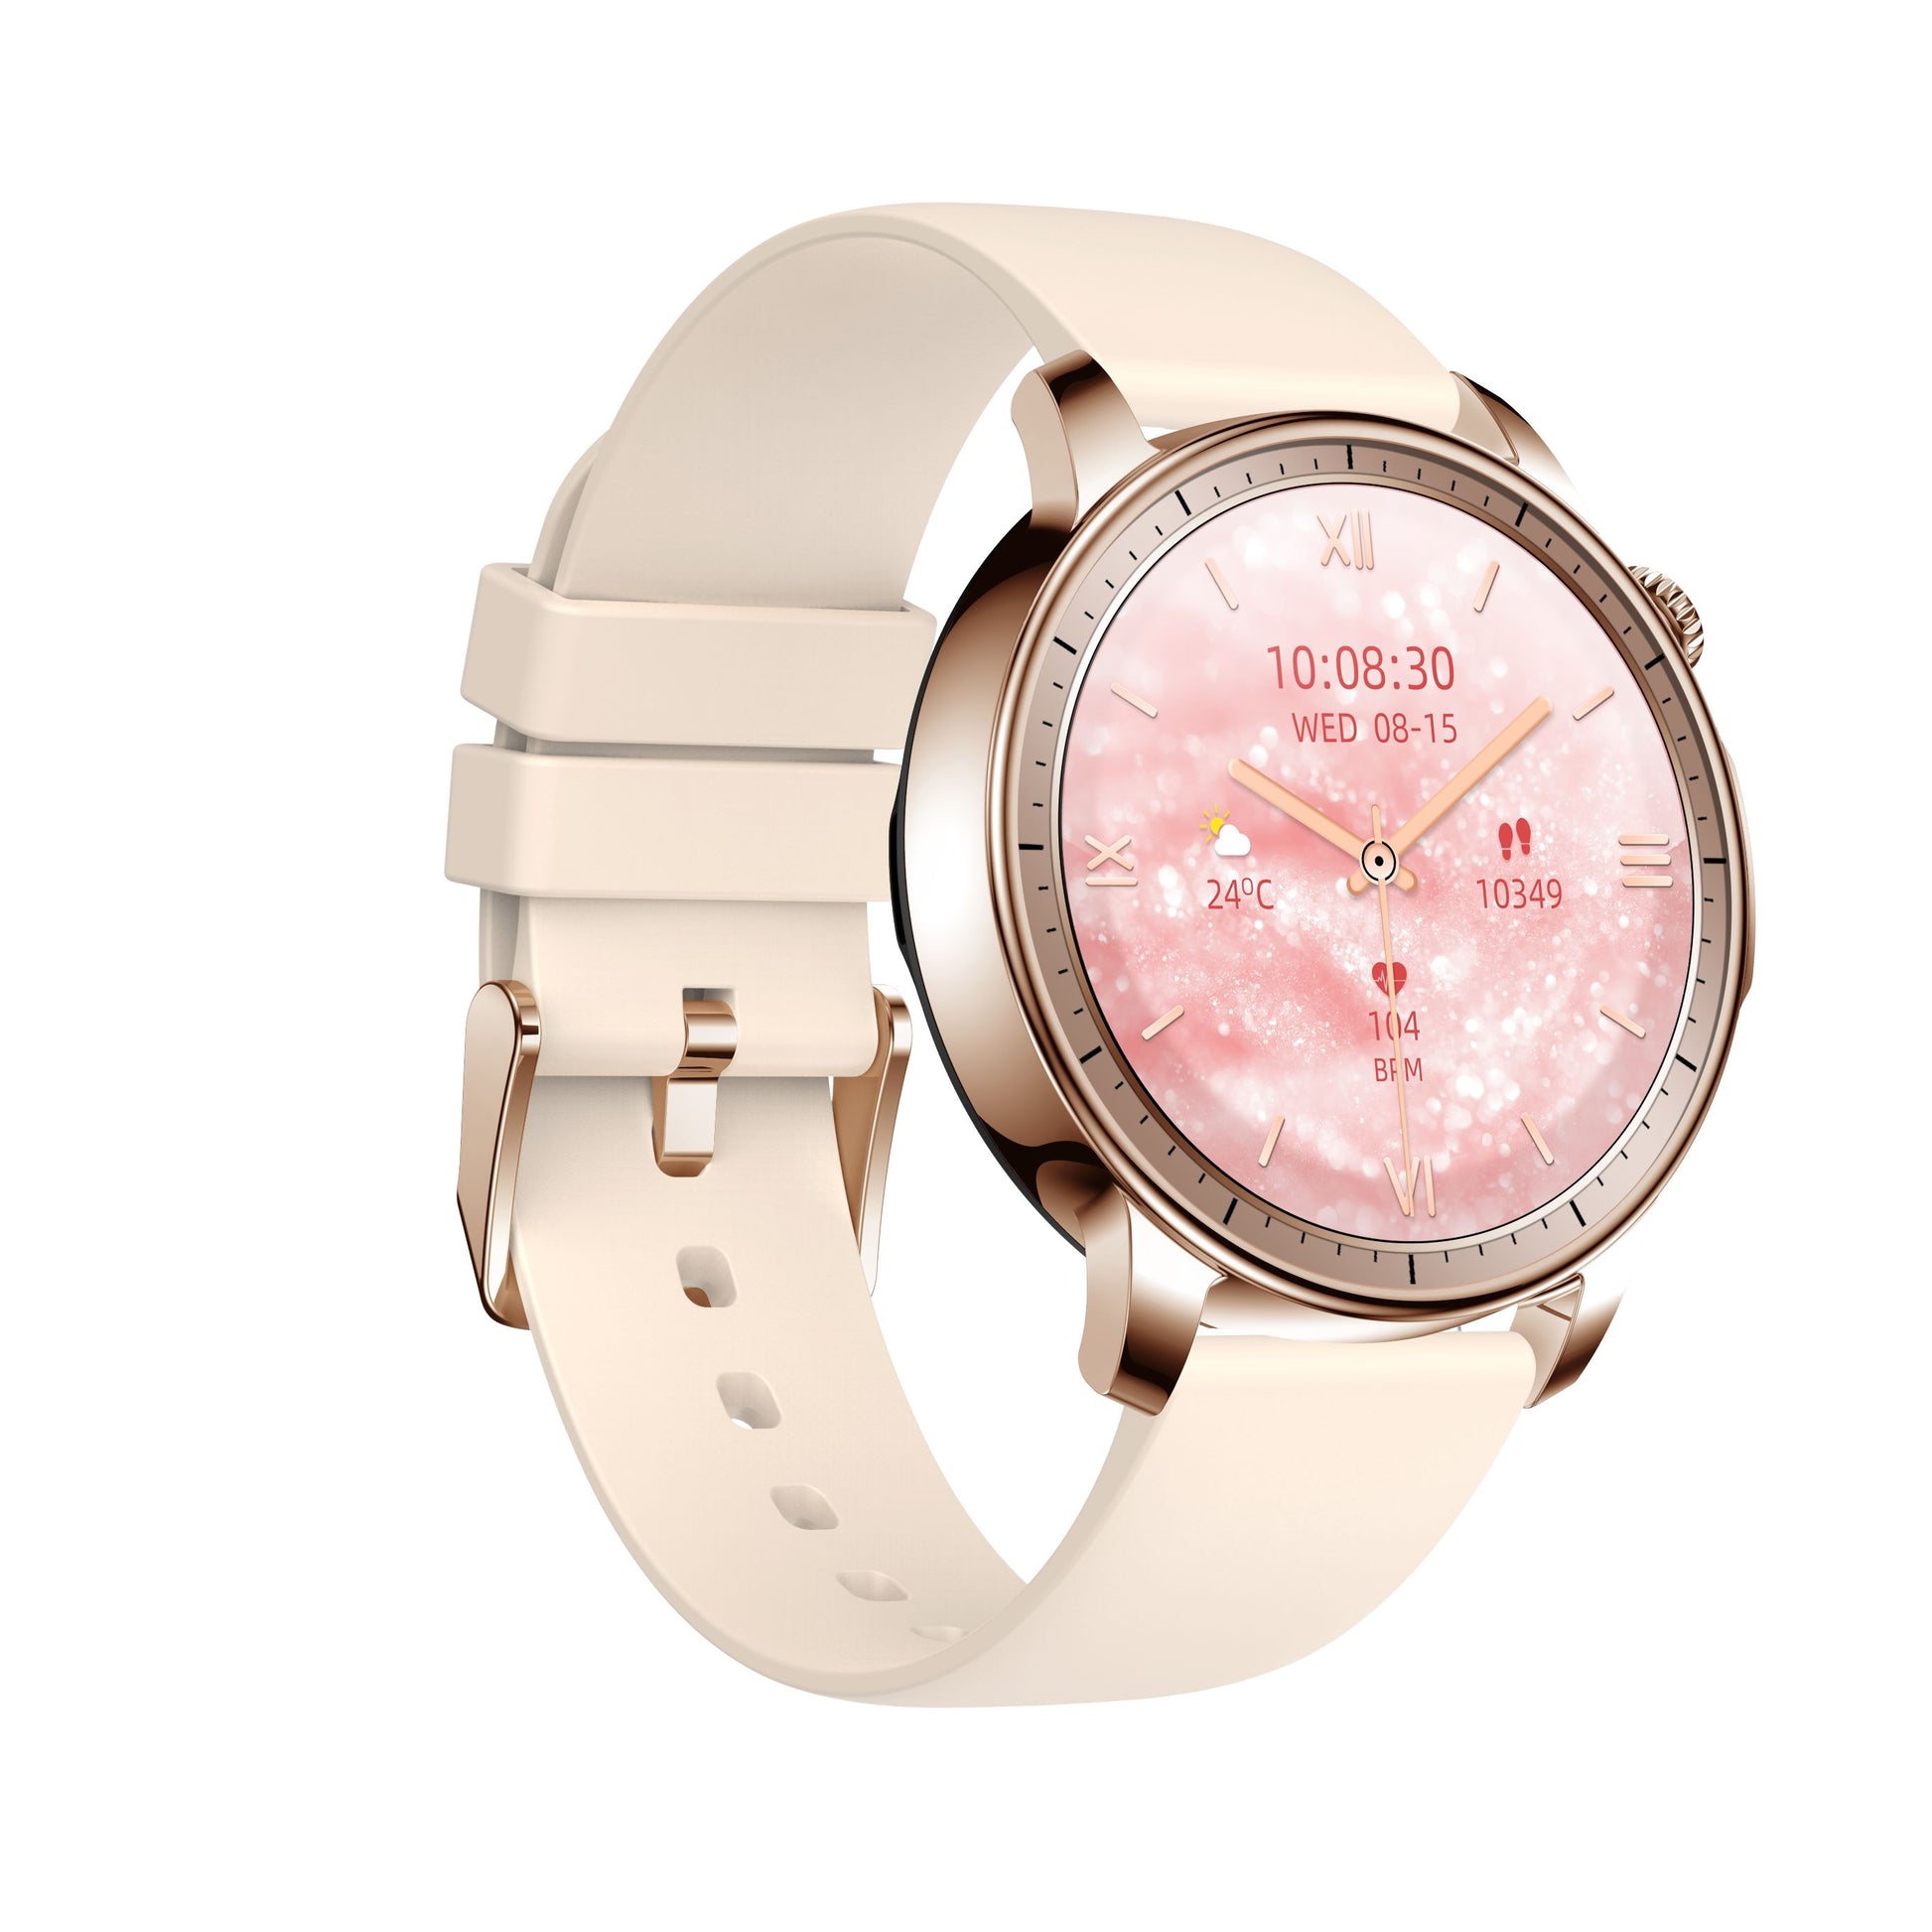 Smart watch COLMI V65 gold right picture